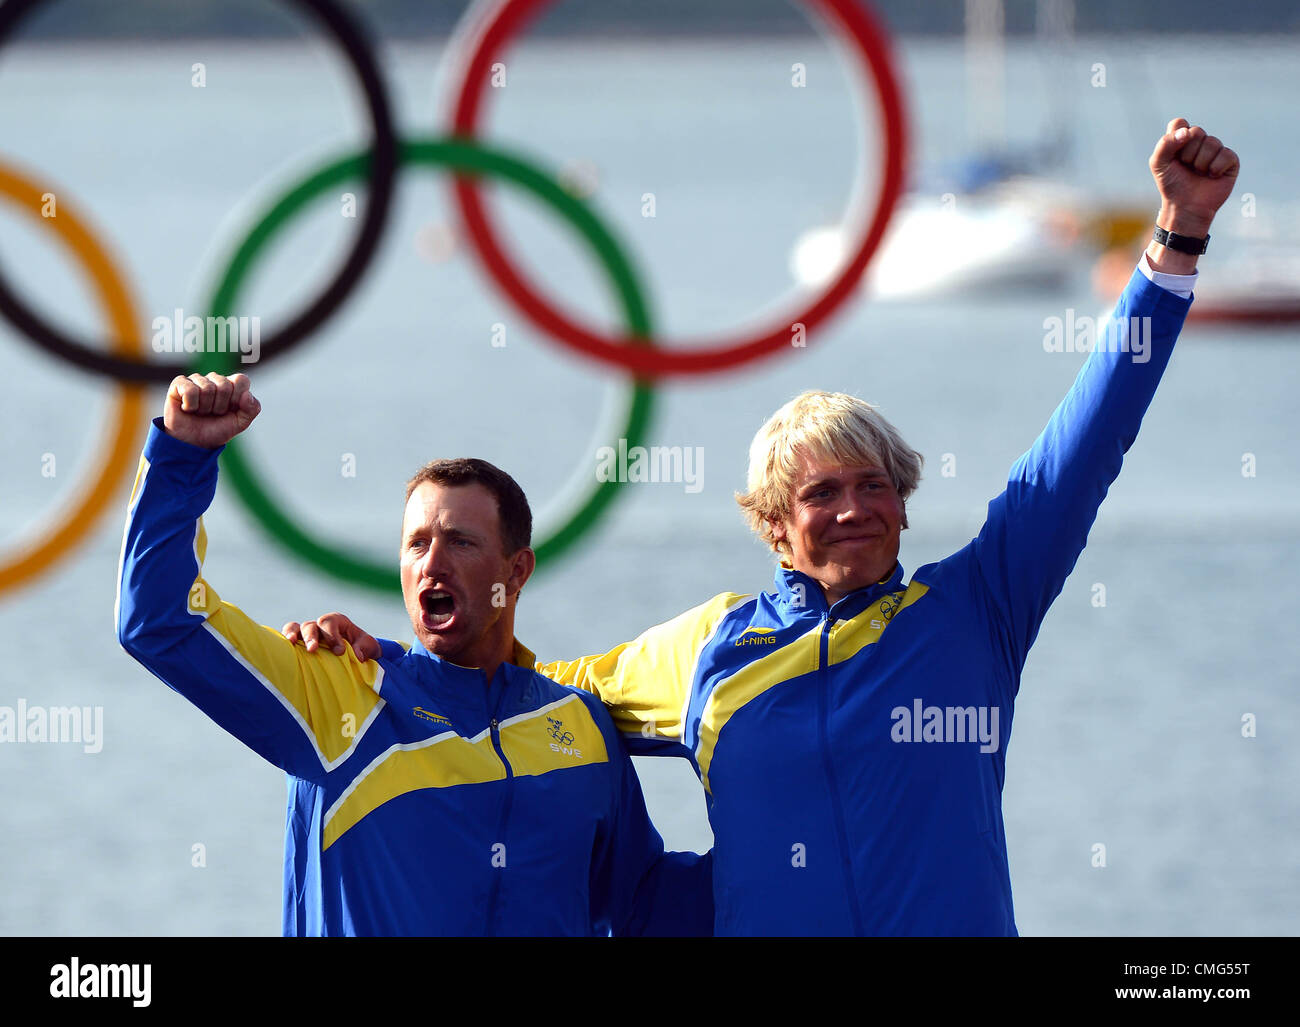 Olympic Sailing, action during the London 2012 Olympic Games at the Weymouth & Portland Venue, Dorset, Britain, UK.  Fredrik Loof and Max Salminen of Sweden celebrate on the podium after winning the gold medal in the Star sailing class August 5th, 2012 Stock Photo